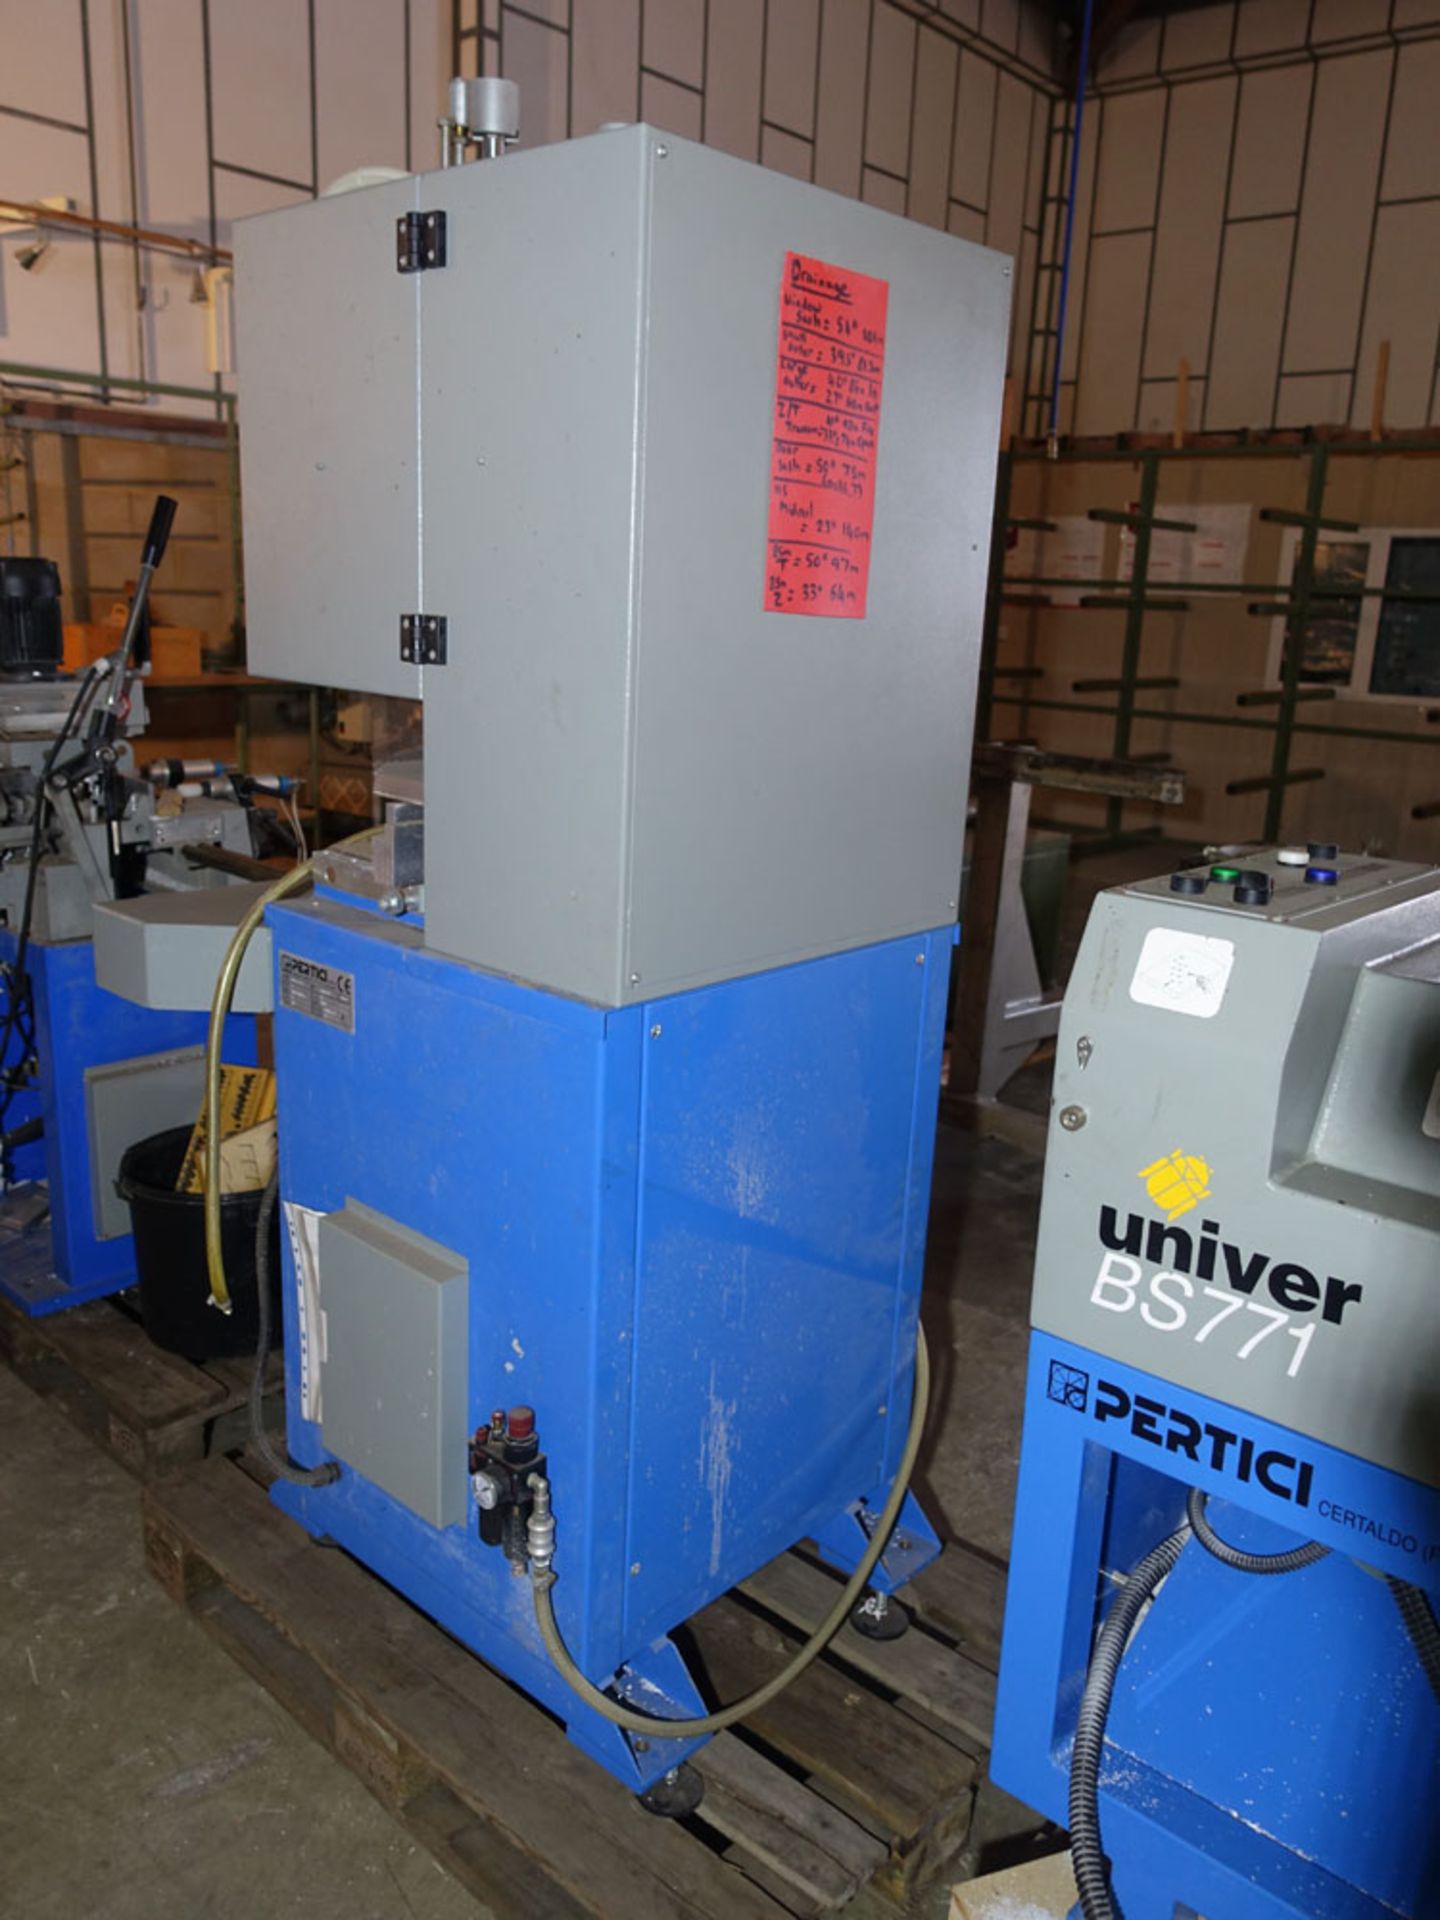 Pertici Univer WM1L/S-M single head welder Serial number 06A134 Year 2006 - Image 7 of 7